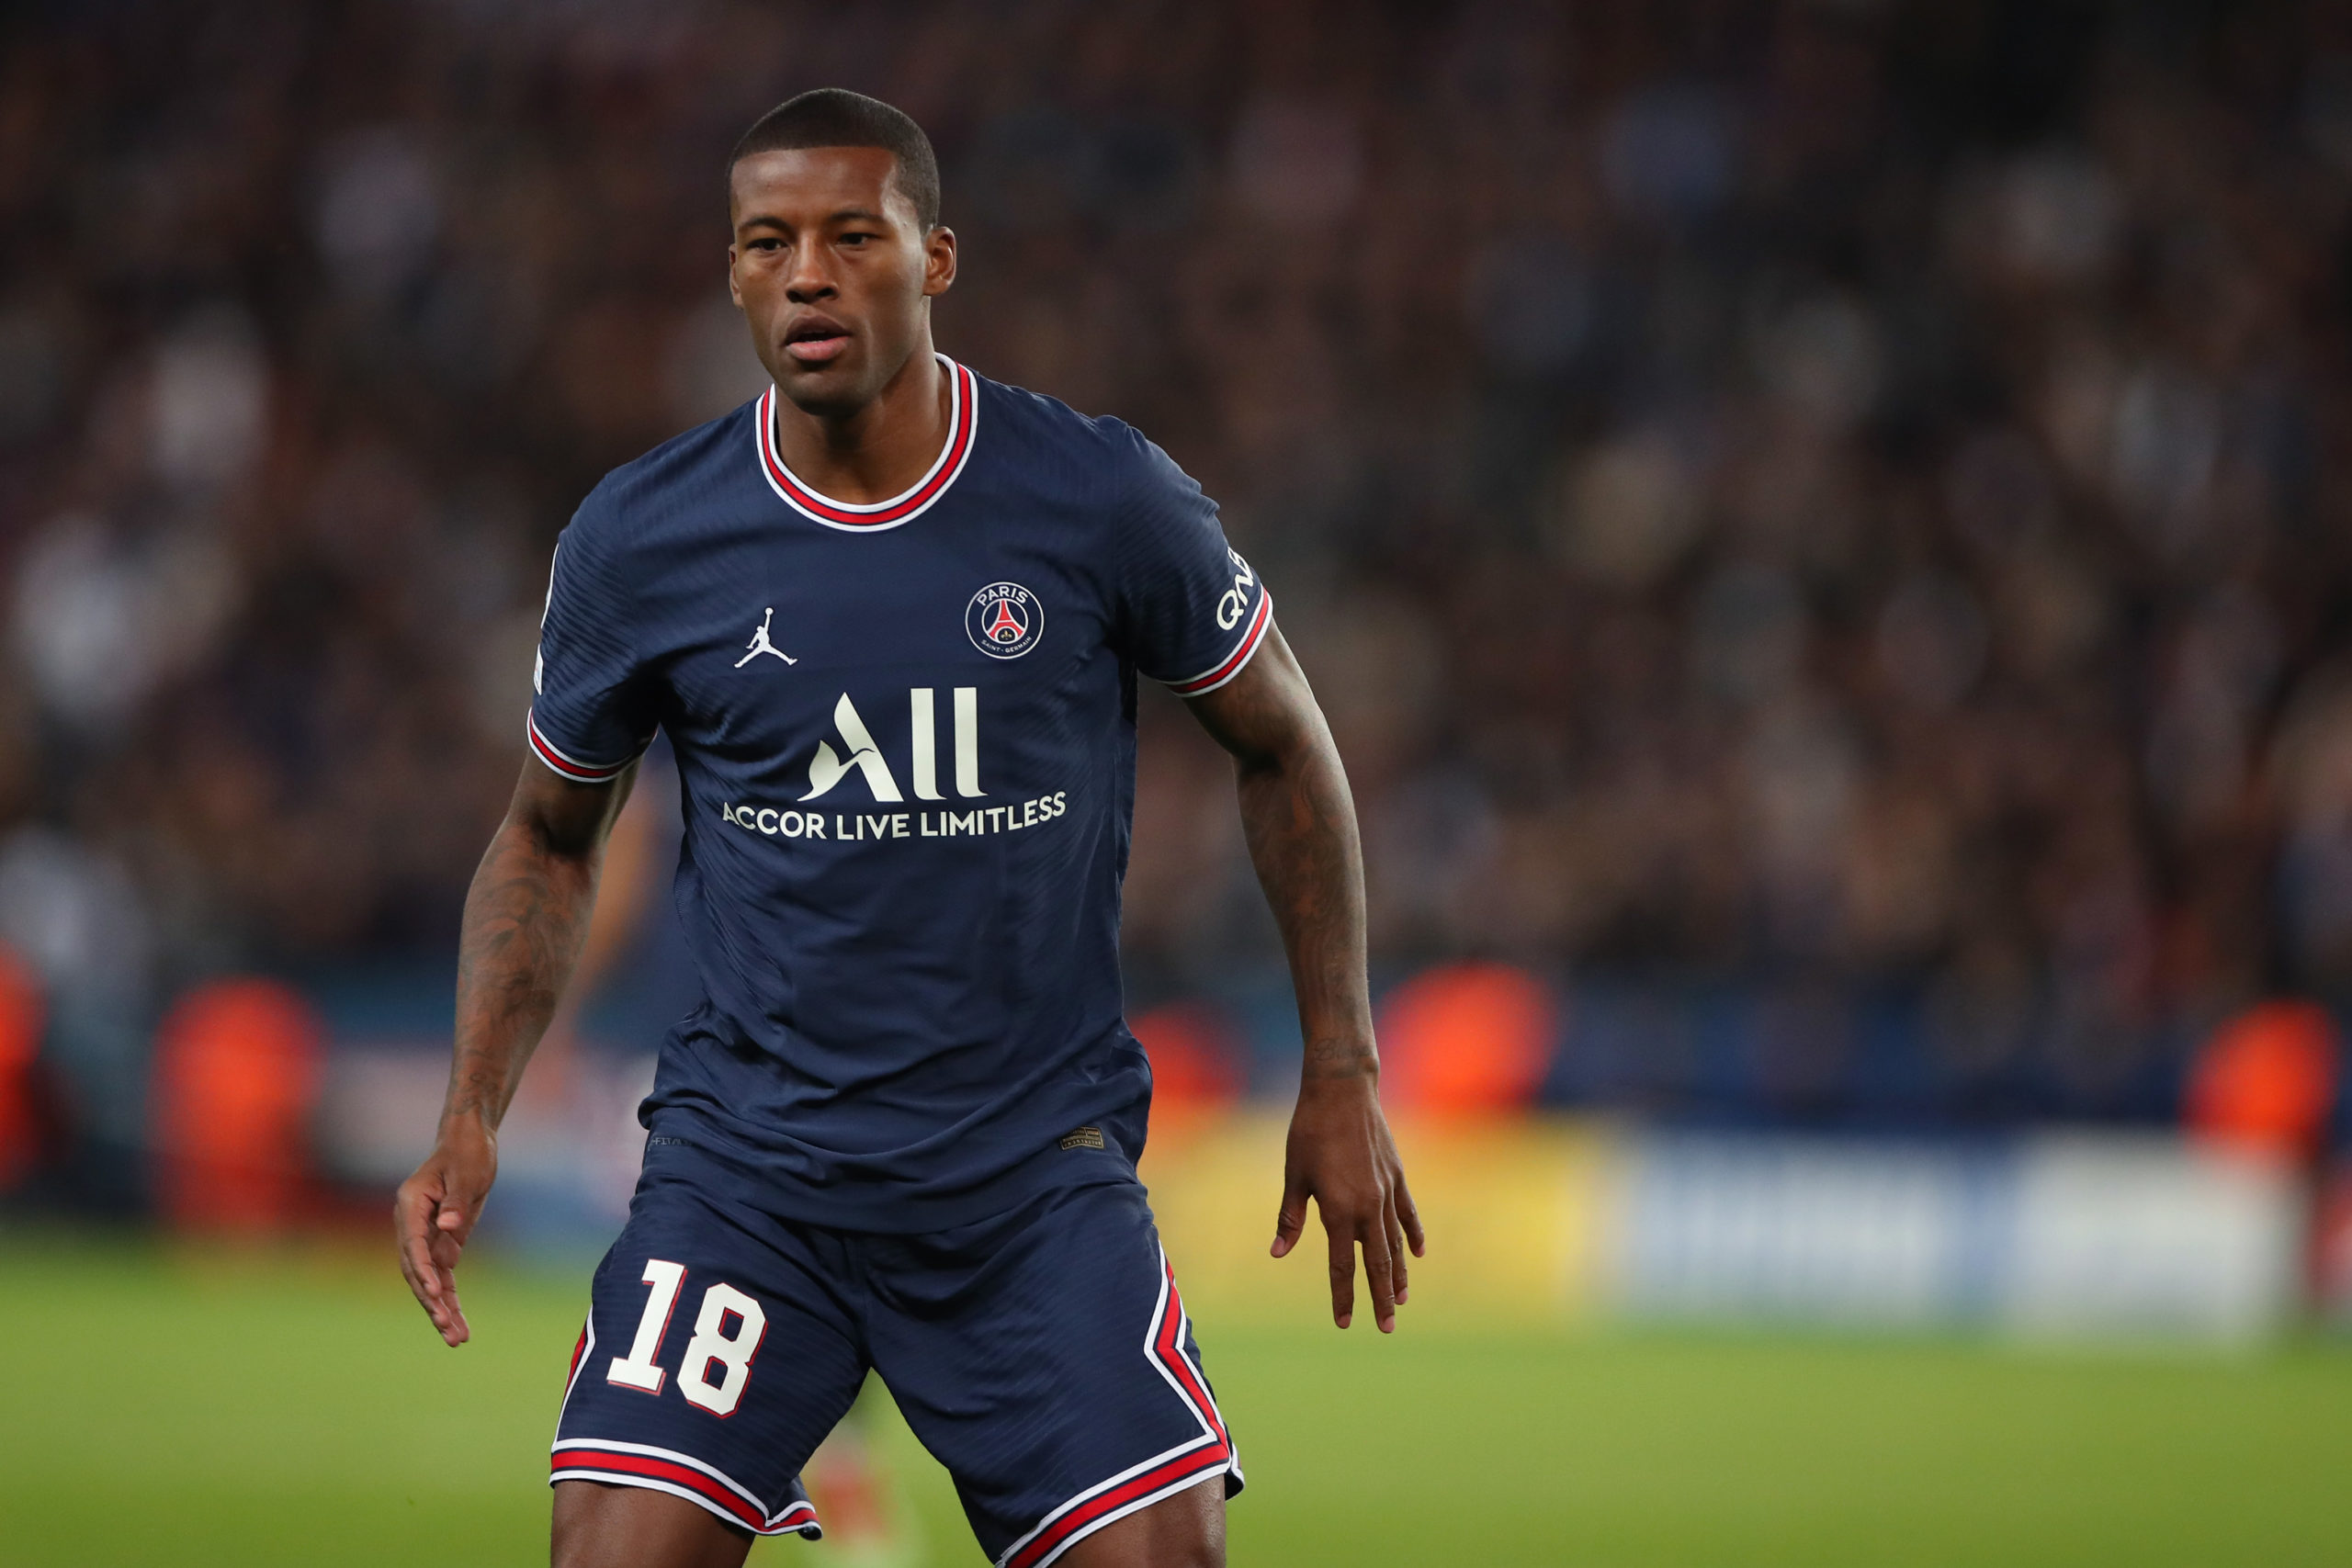 West Ham are allegedly eyeing PSG ace Gini Wijnaldum ahead of the summer transfer window